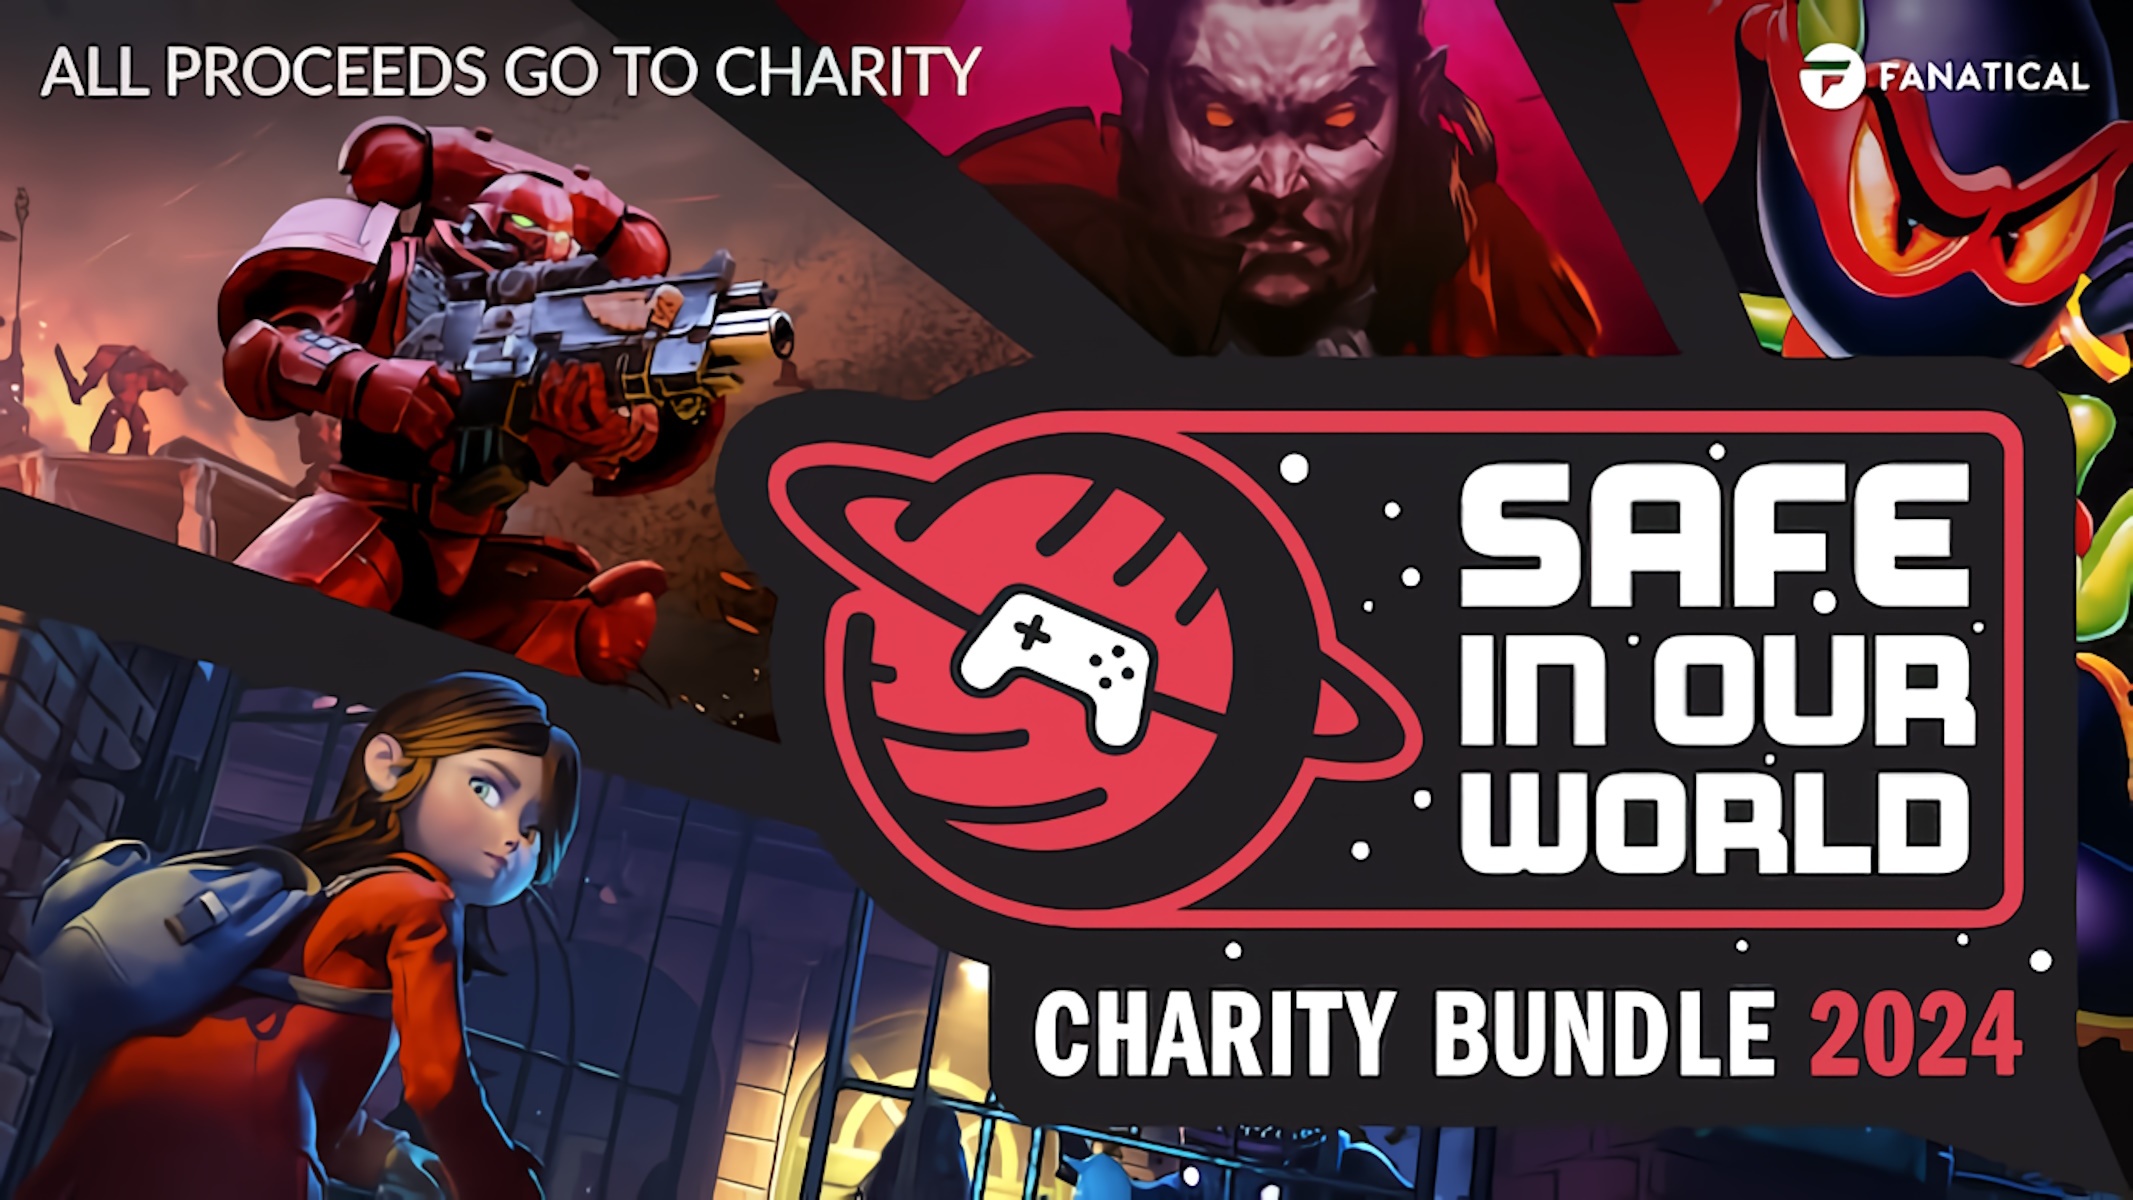 Fanatical Safe in our World Charity Bundle 2024